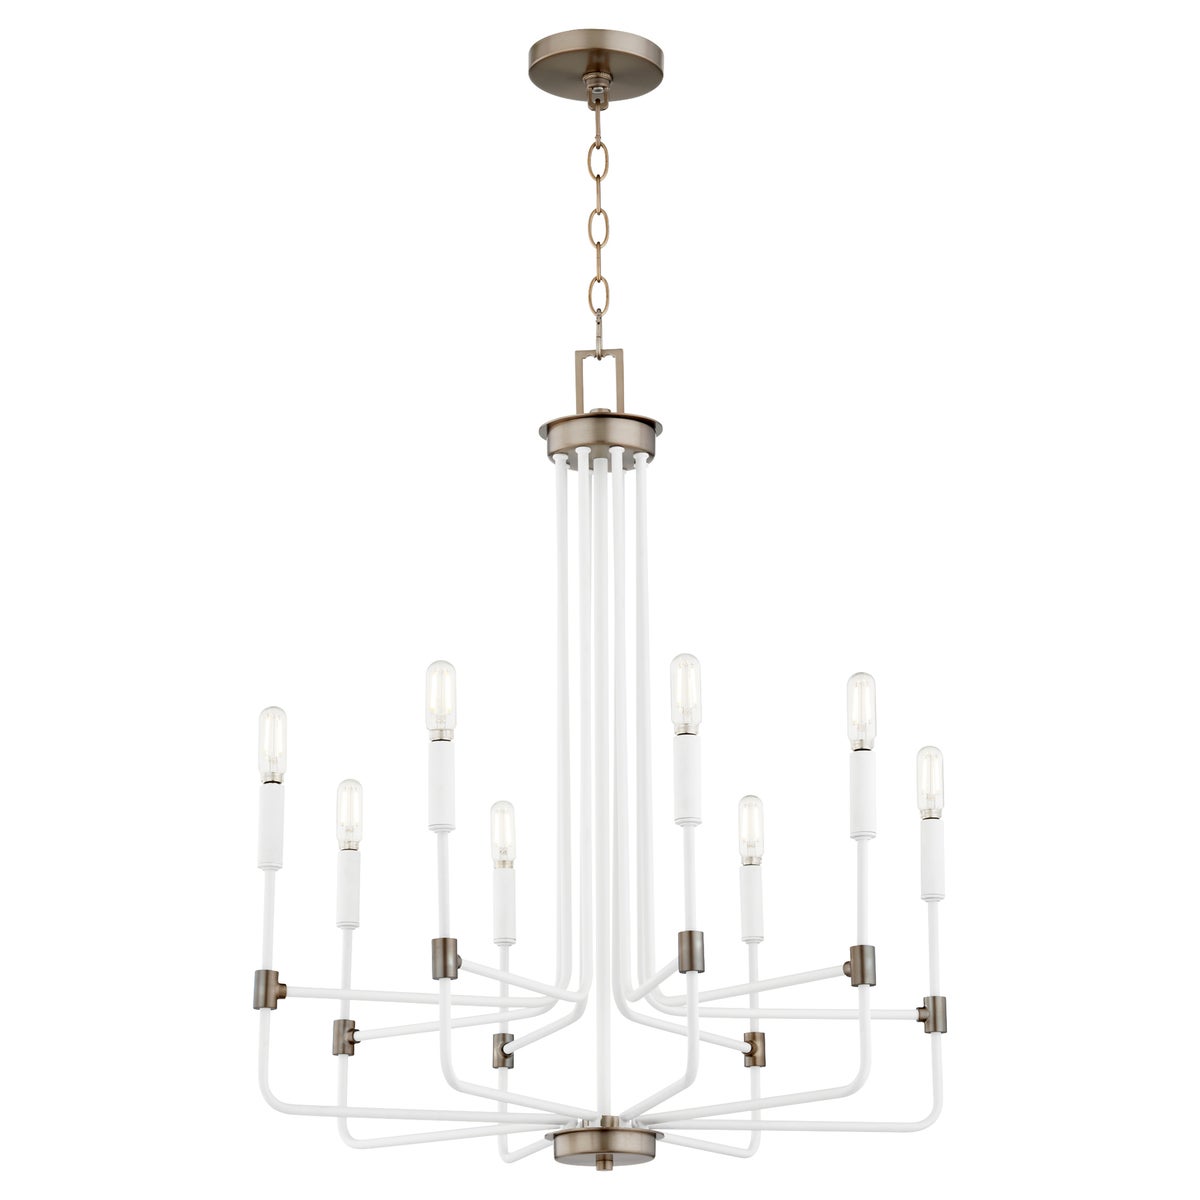 Dining Room Chandelier with contemporary parallel arms and white tubes, adding balance to any environment. 8 bulbs, 60W, dimmable. UL Listed. 24.5"W x 29"H.